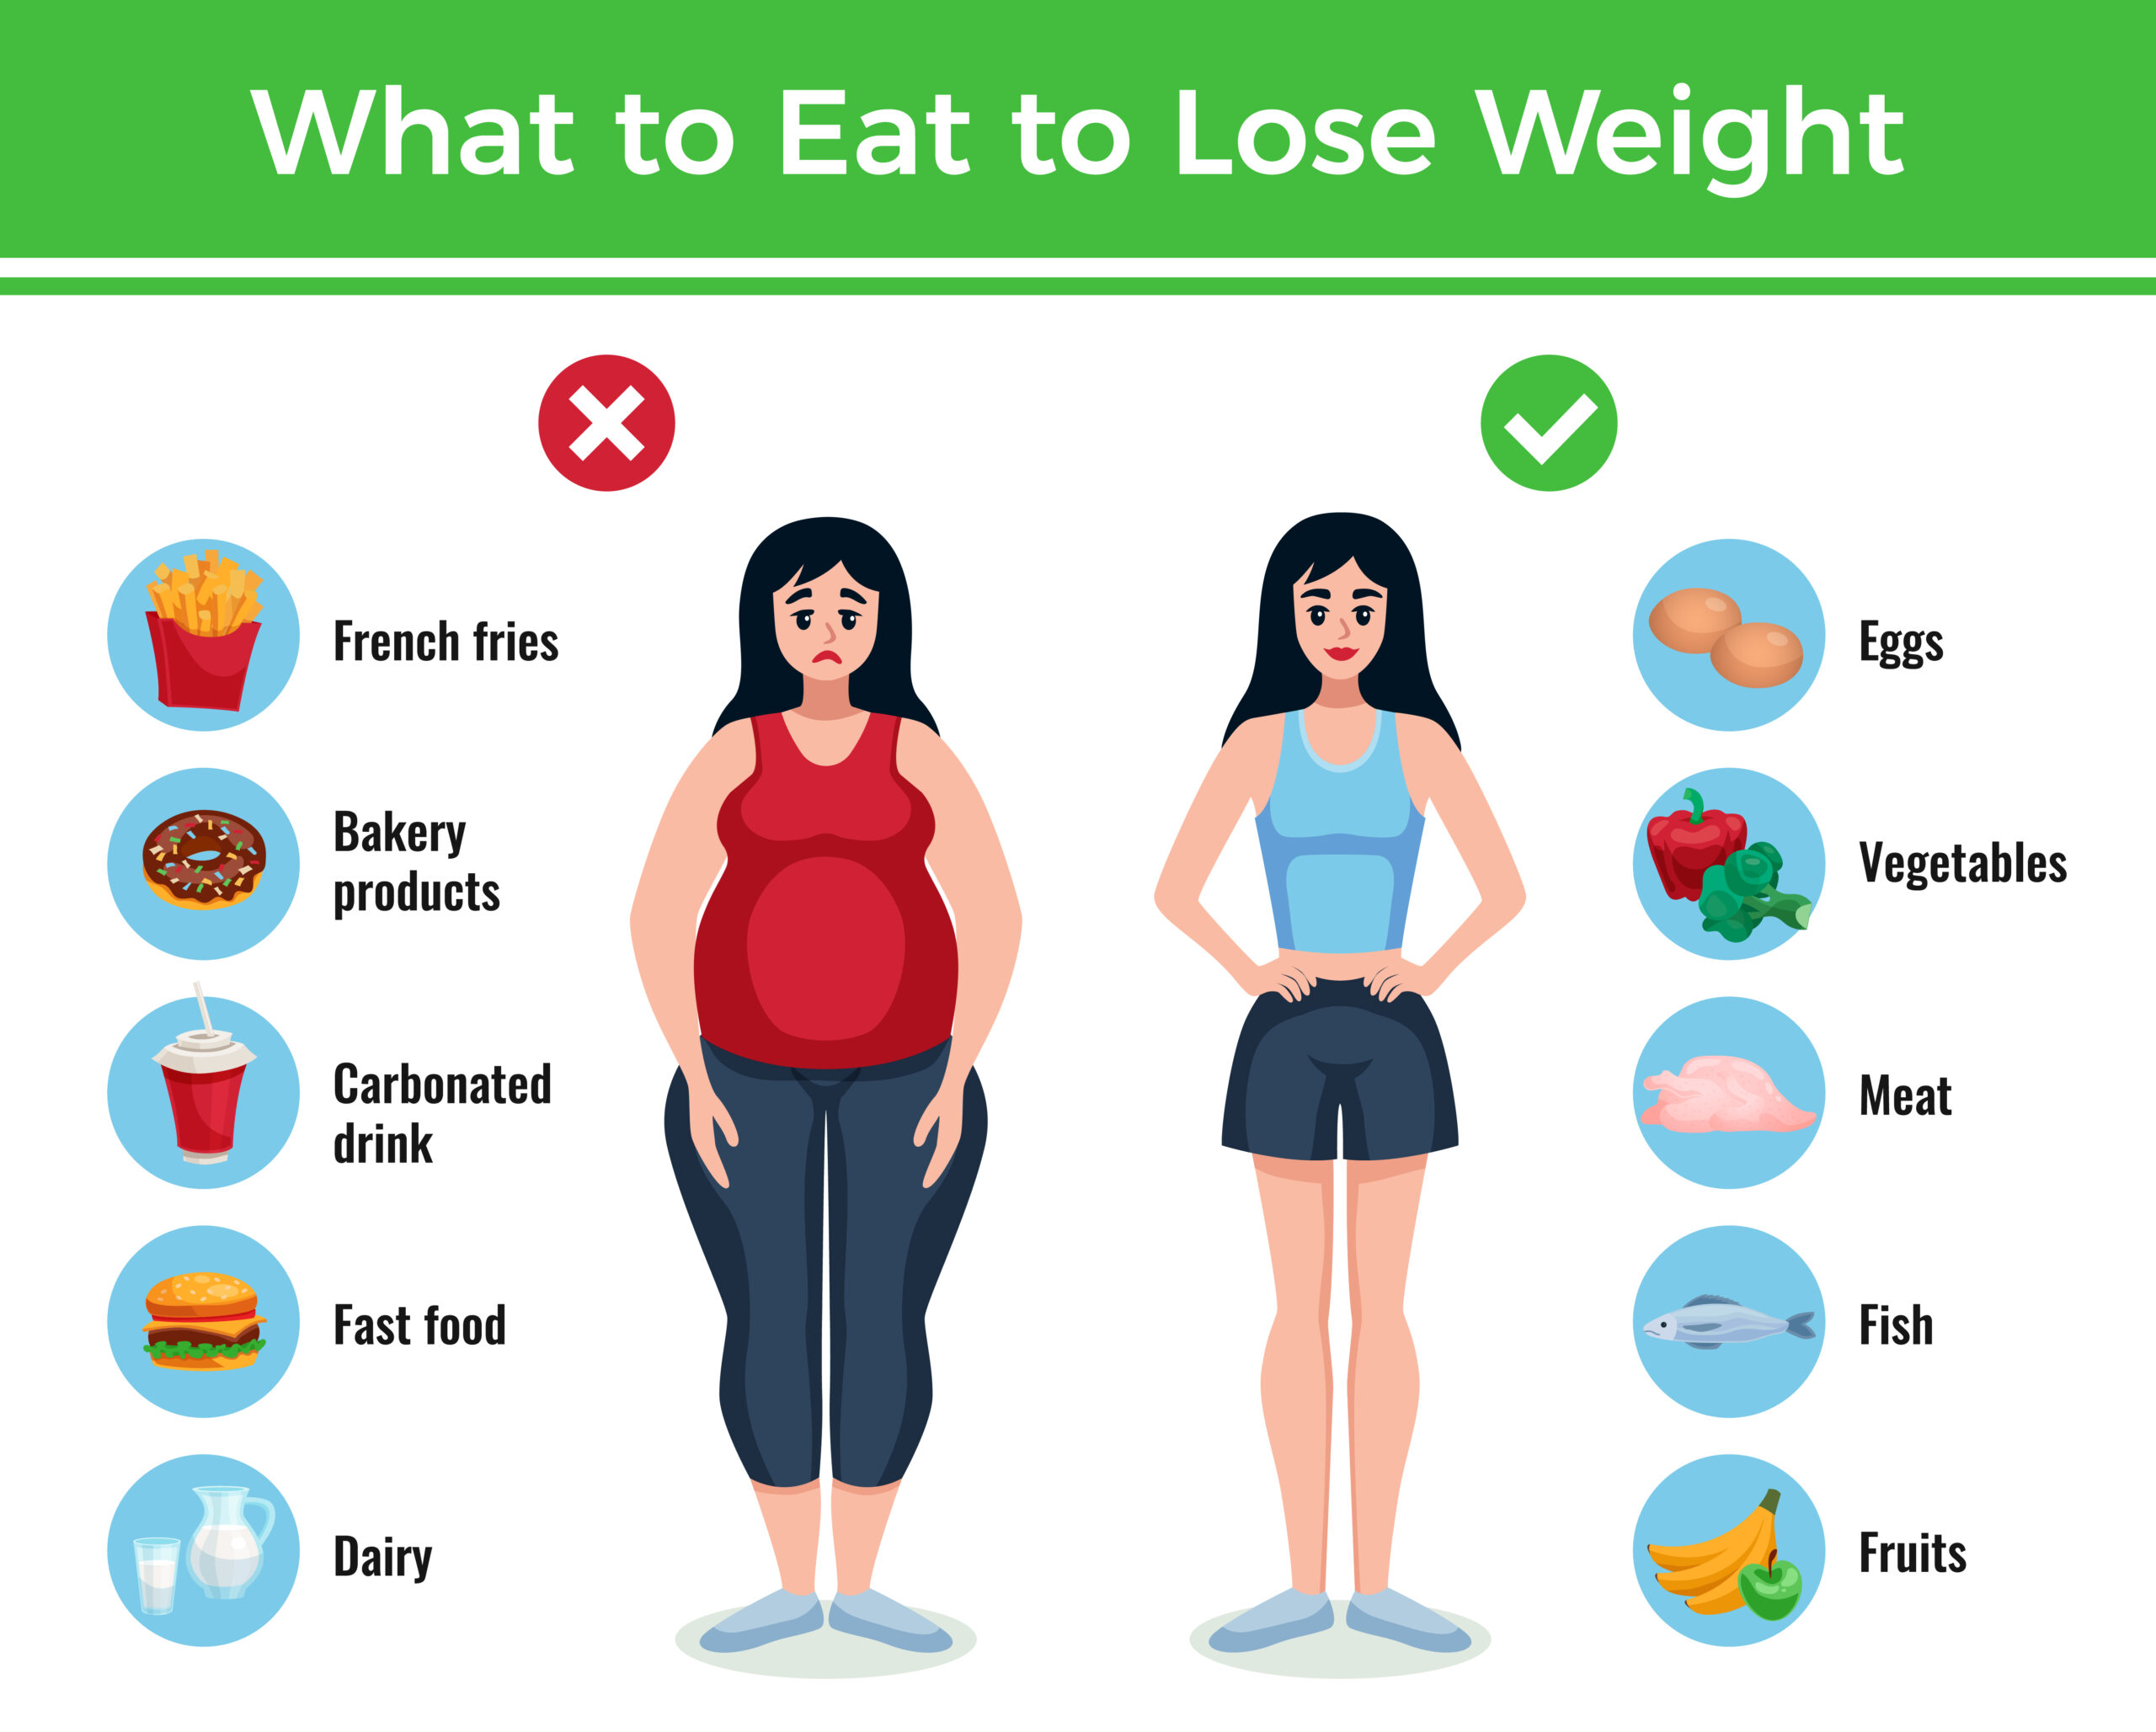 Weight loss tips